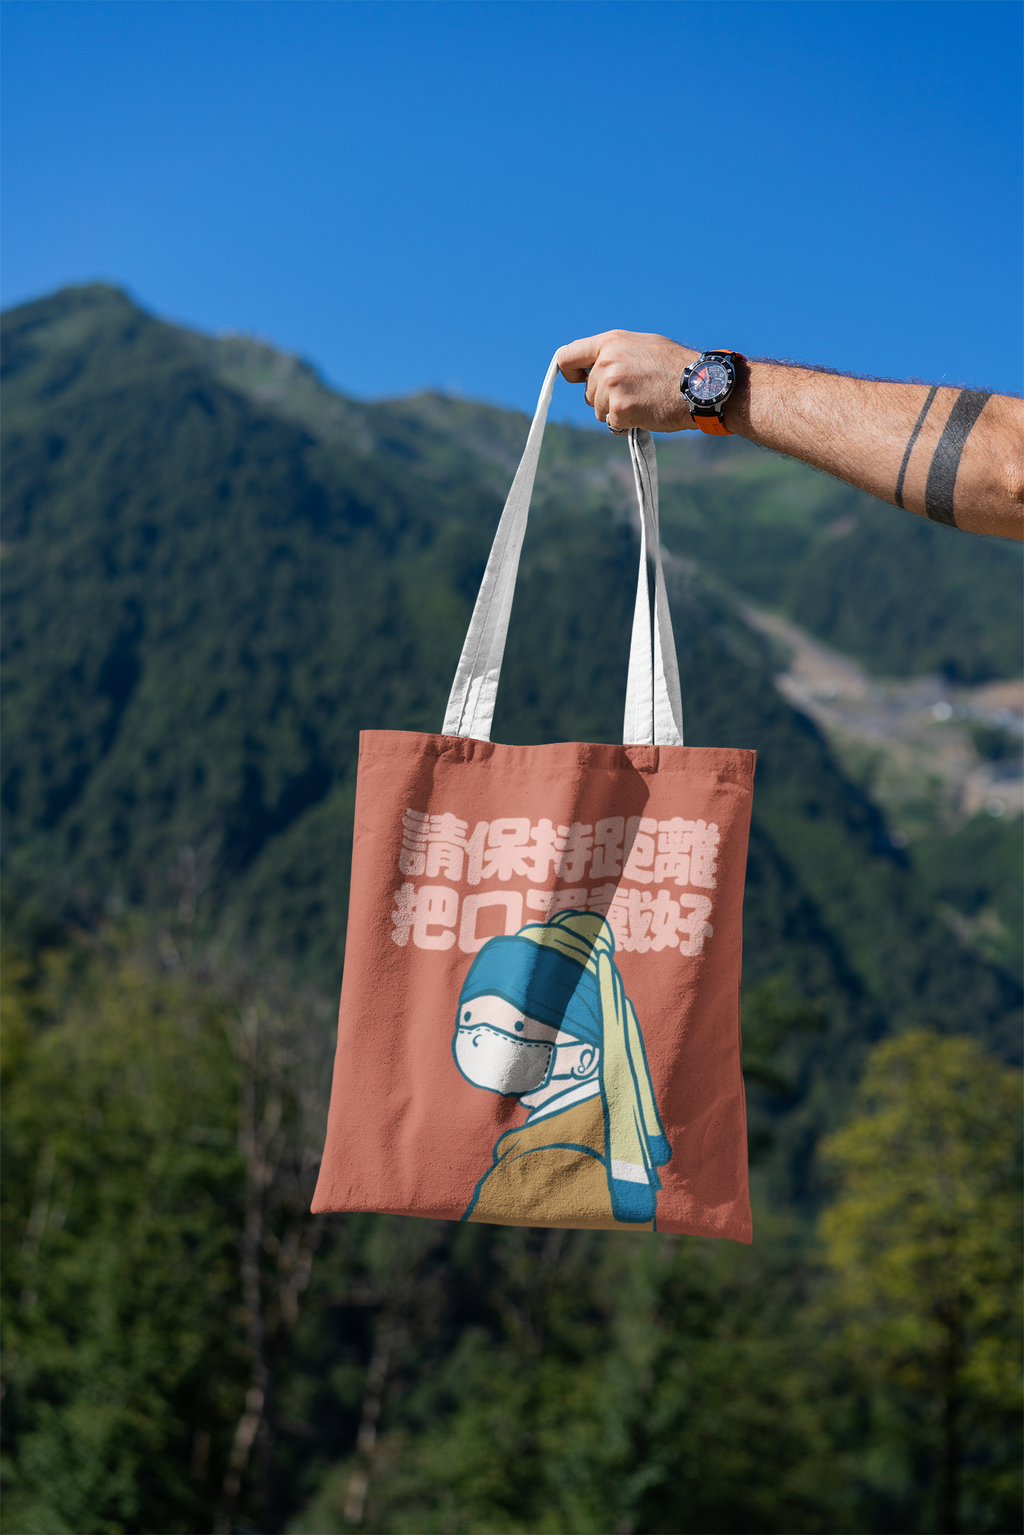 mockup-featuring-a-man-s-hand-holding-a-tote-bag-against-a-natural-scenery-3131-el1 (29).png